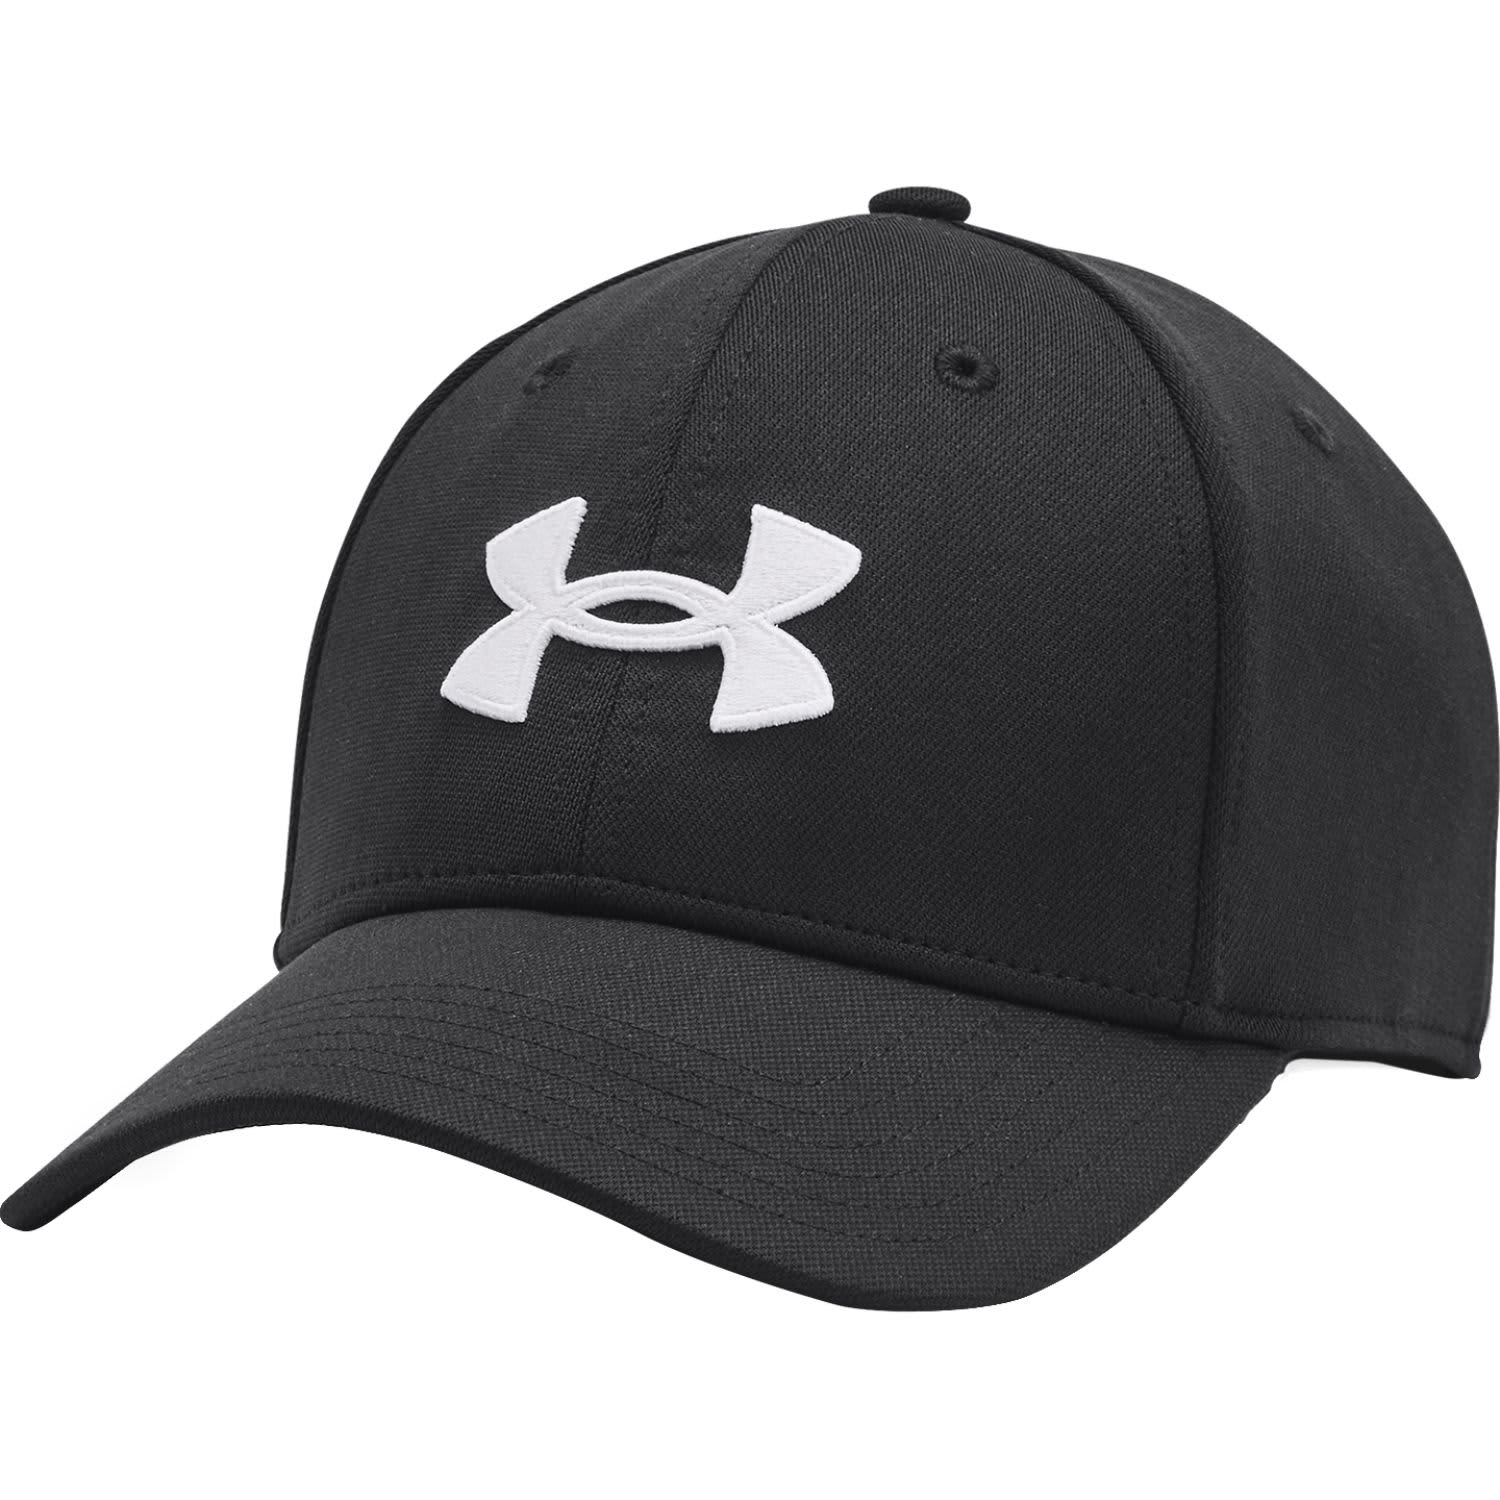 Under Armour Mens Fish Hook 2.0 Hat